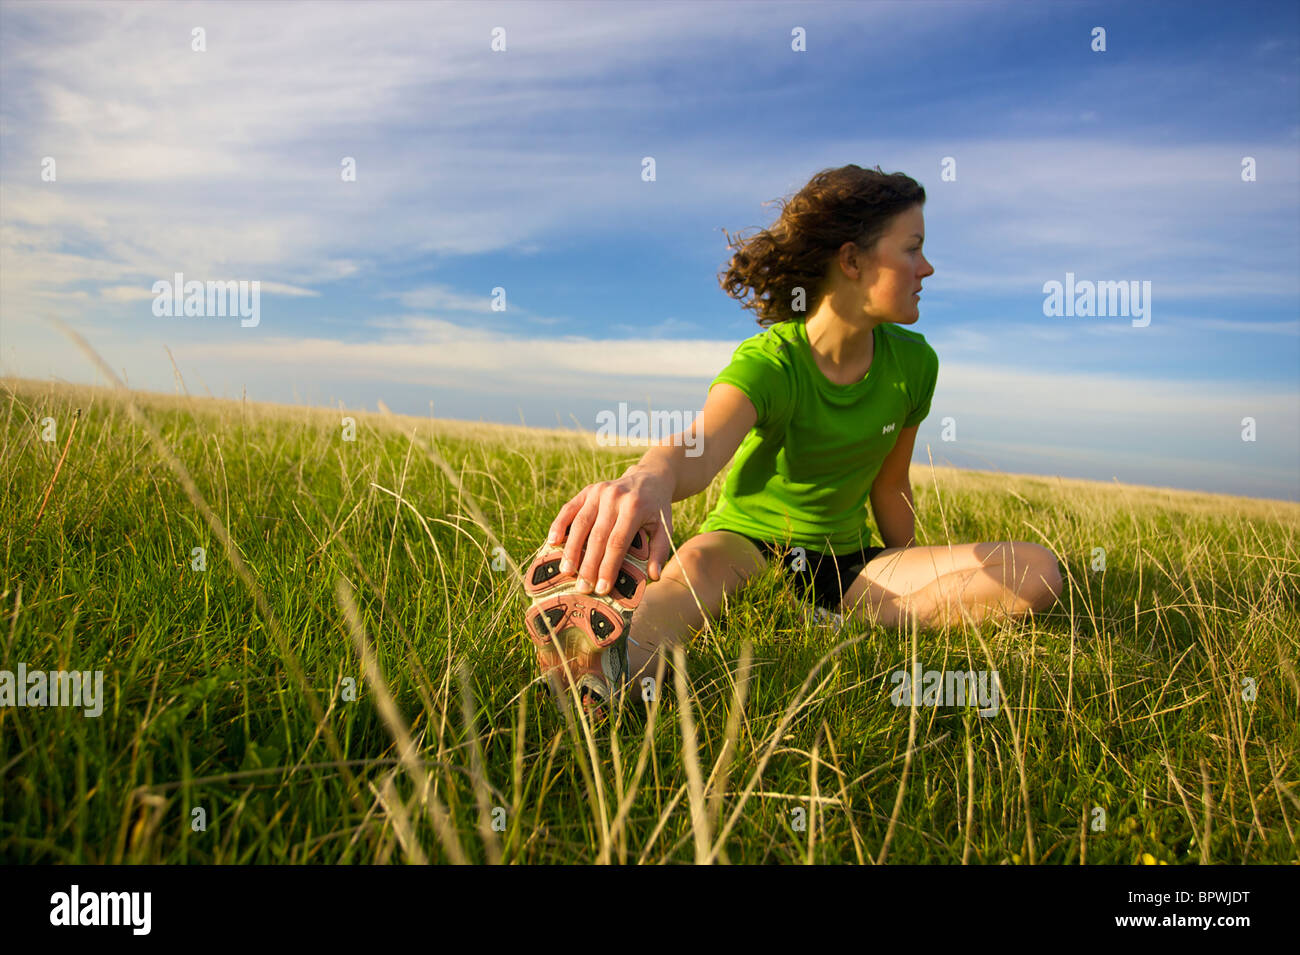 A female runner stretches and warms up on the grass before a long run Stock Photo